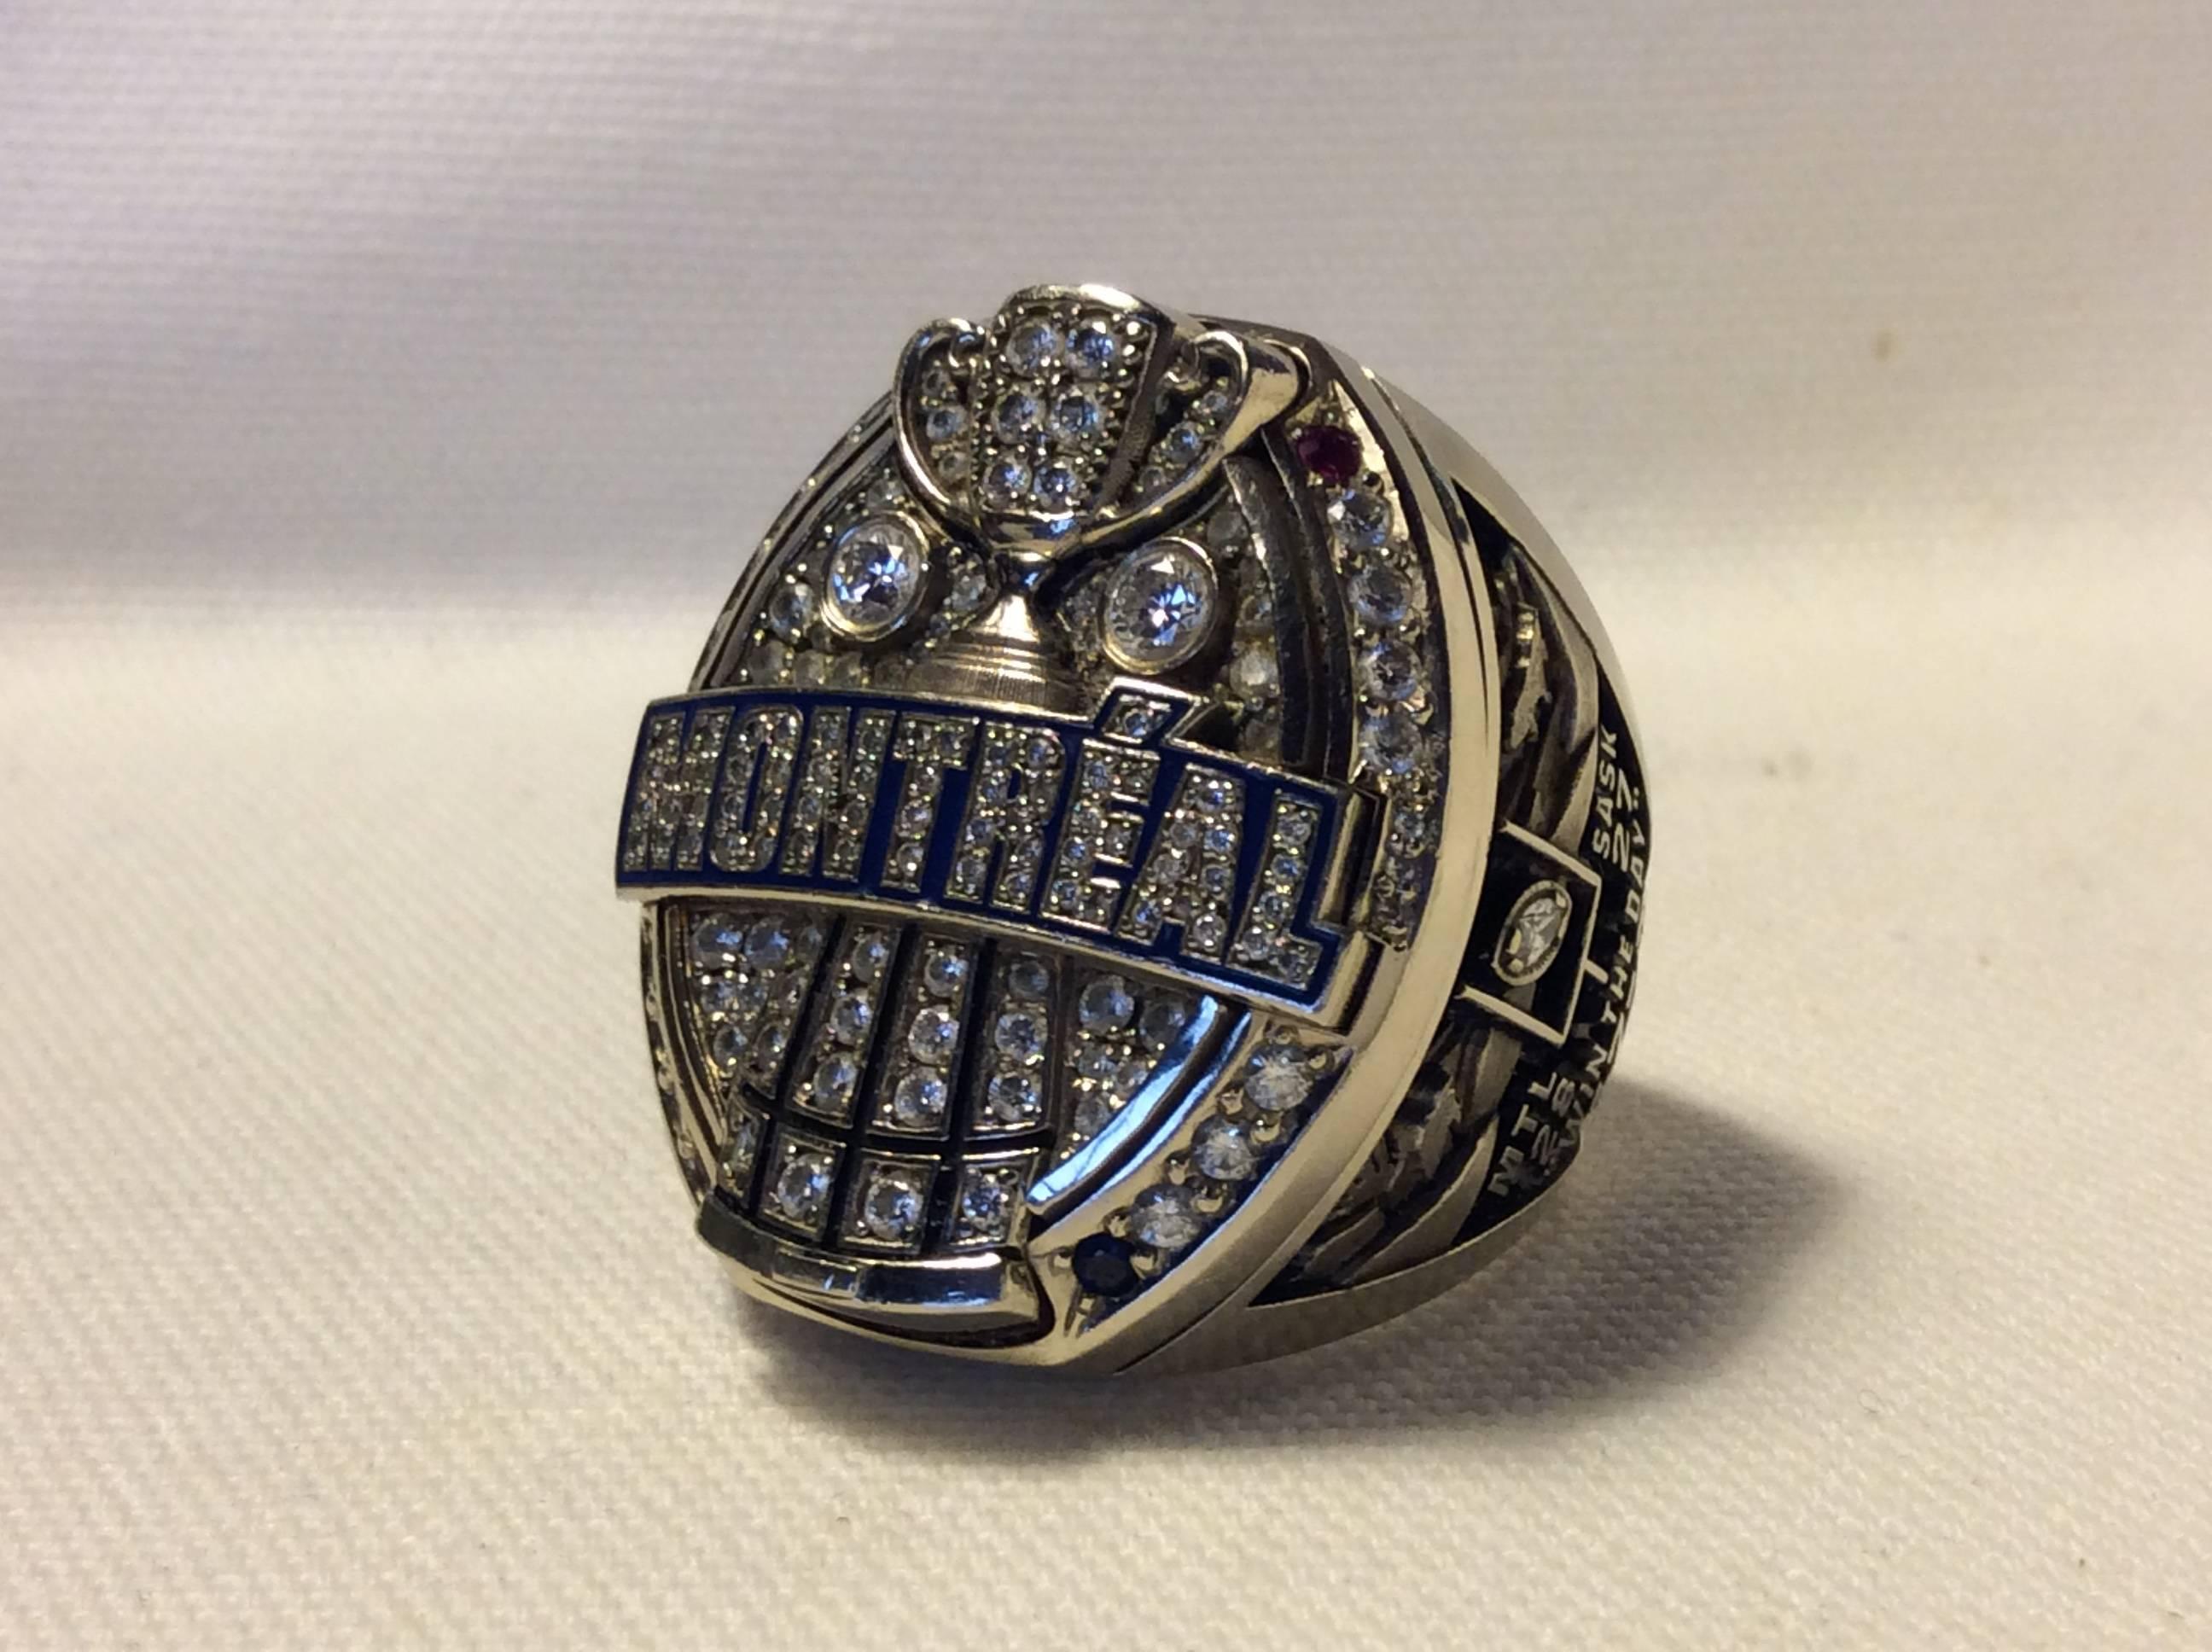 2009 Montreal Alouettes CFL Grey cup Players Championship ring. Made of 10-karat gold with all real high grade diamonds, Rubies, and Sapphires. Size 13.5-14, weighs a massive 80.5 grams makes this one of the largest championship rings ever produced.